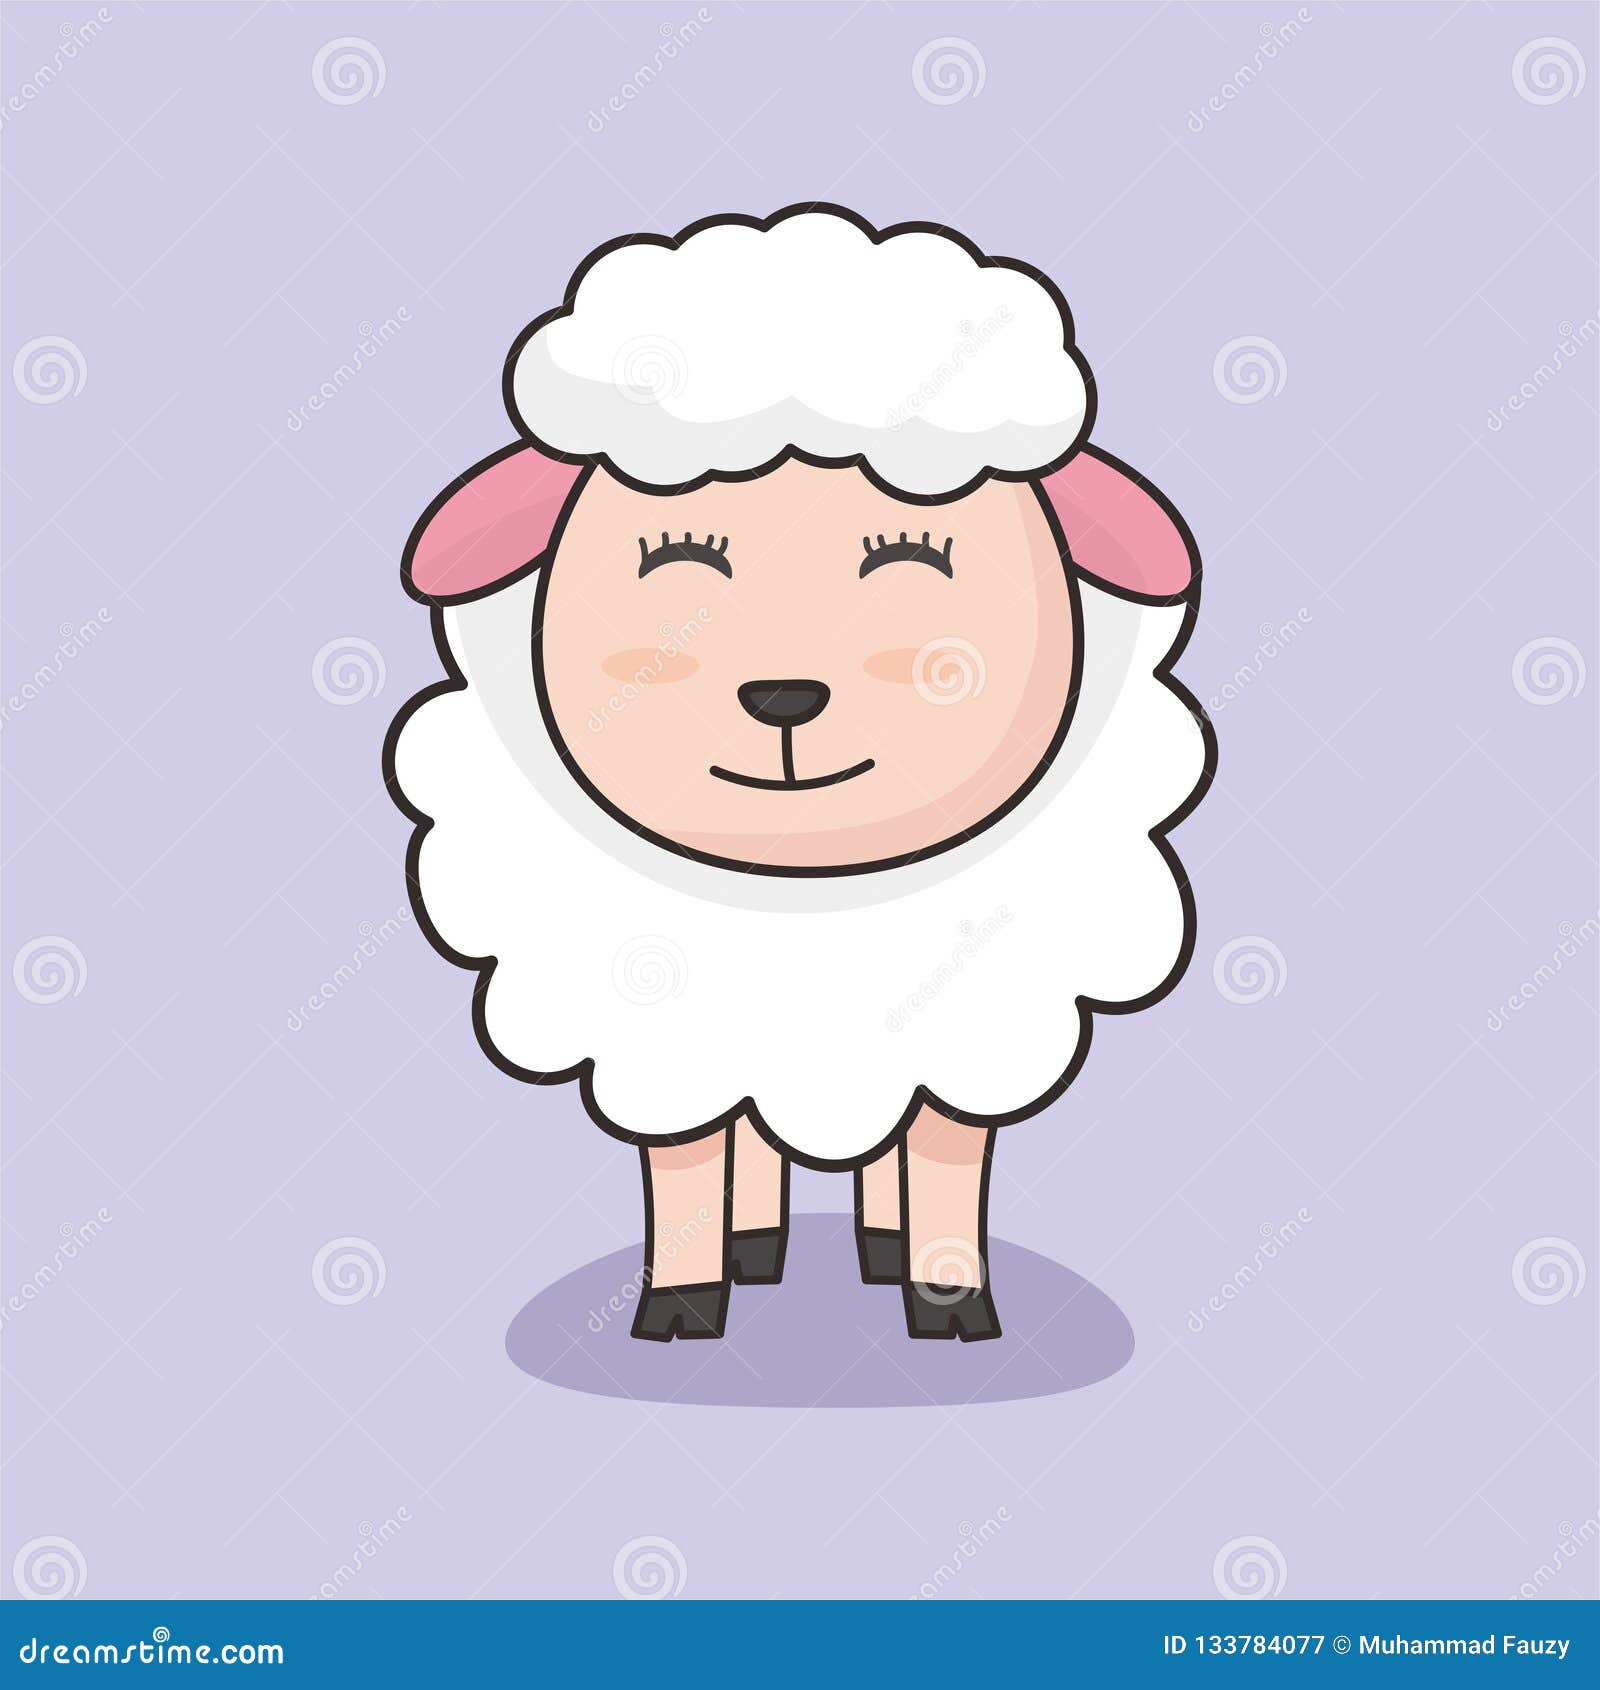  Cute  Isolated Sheep  Vector With Simple Design Stock Vector 